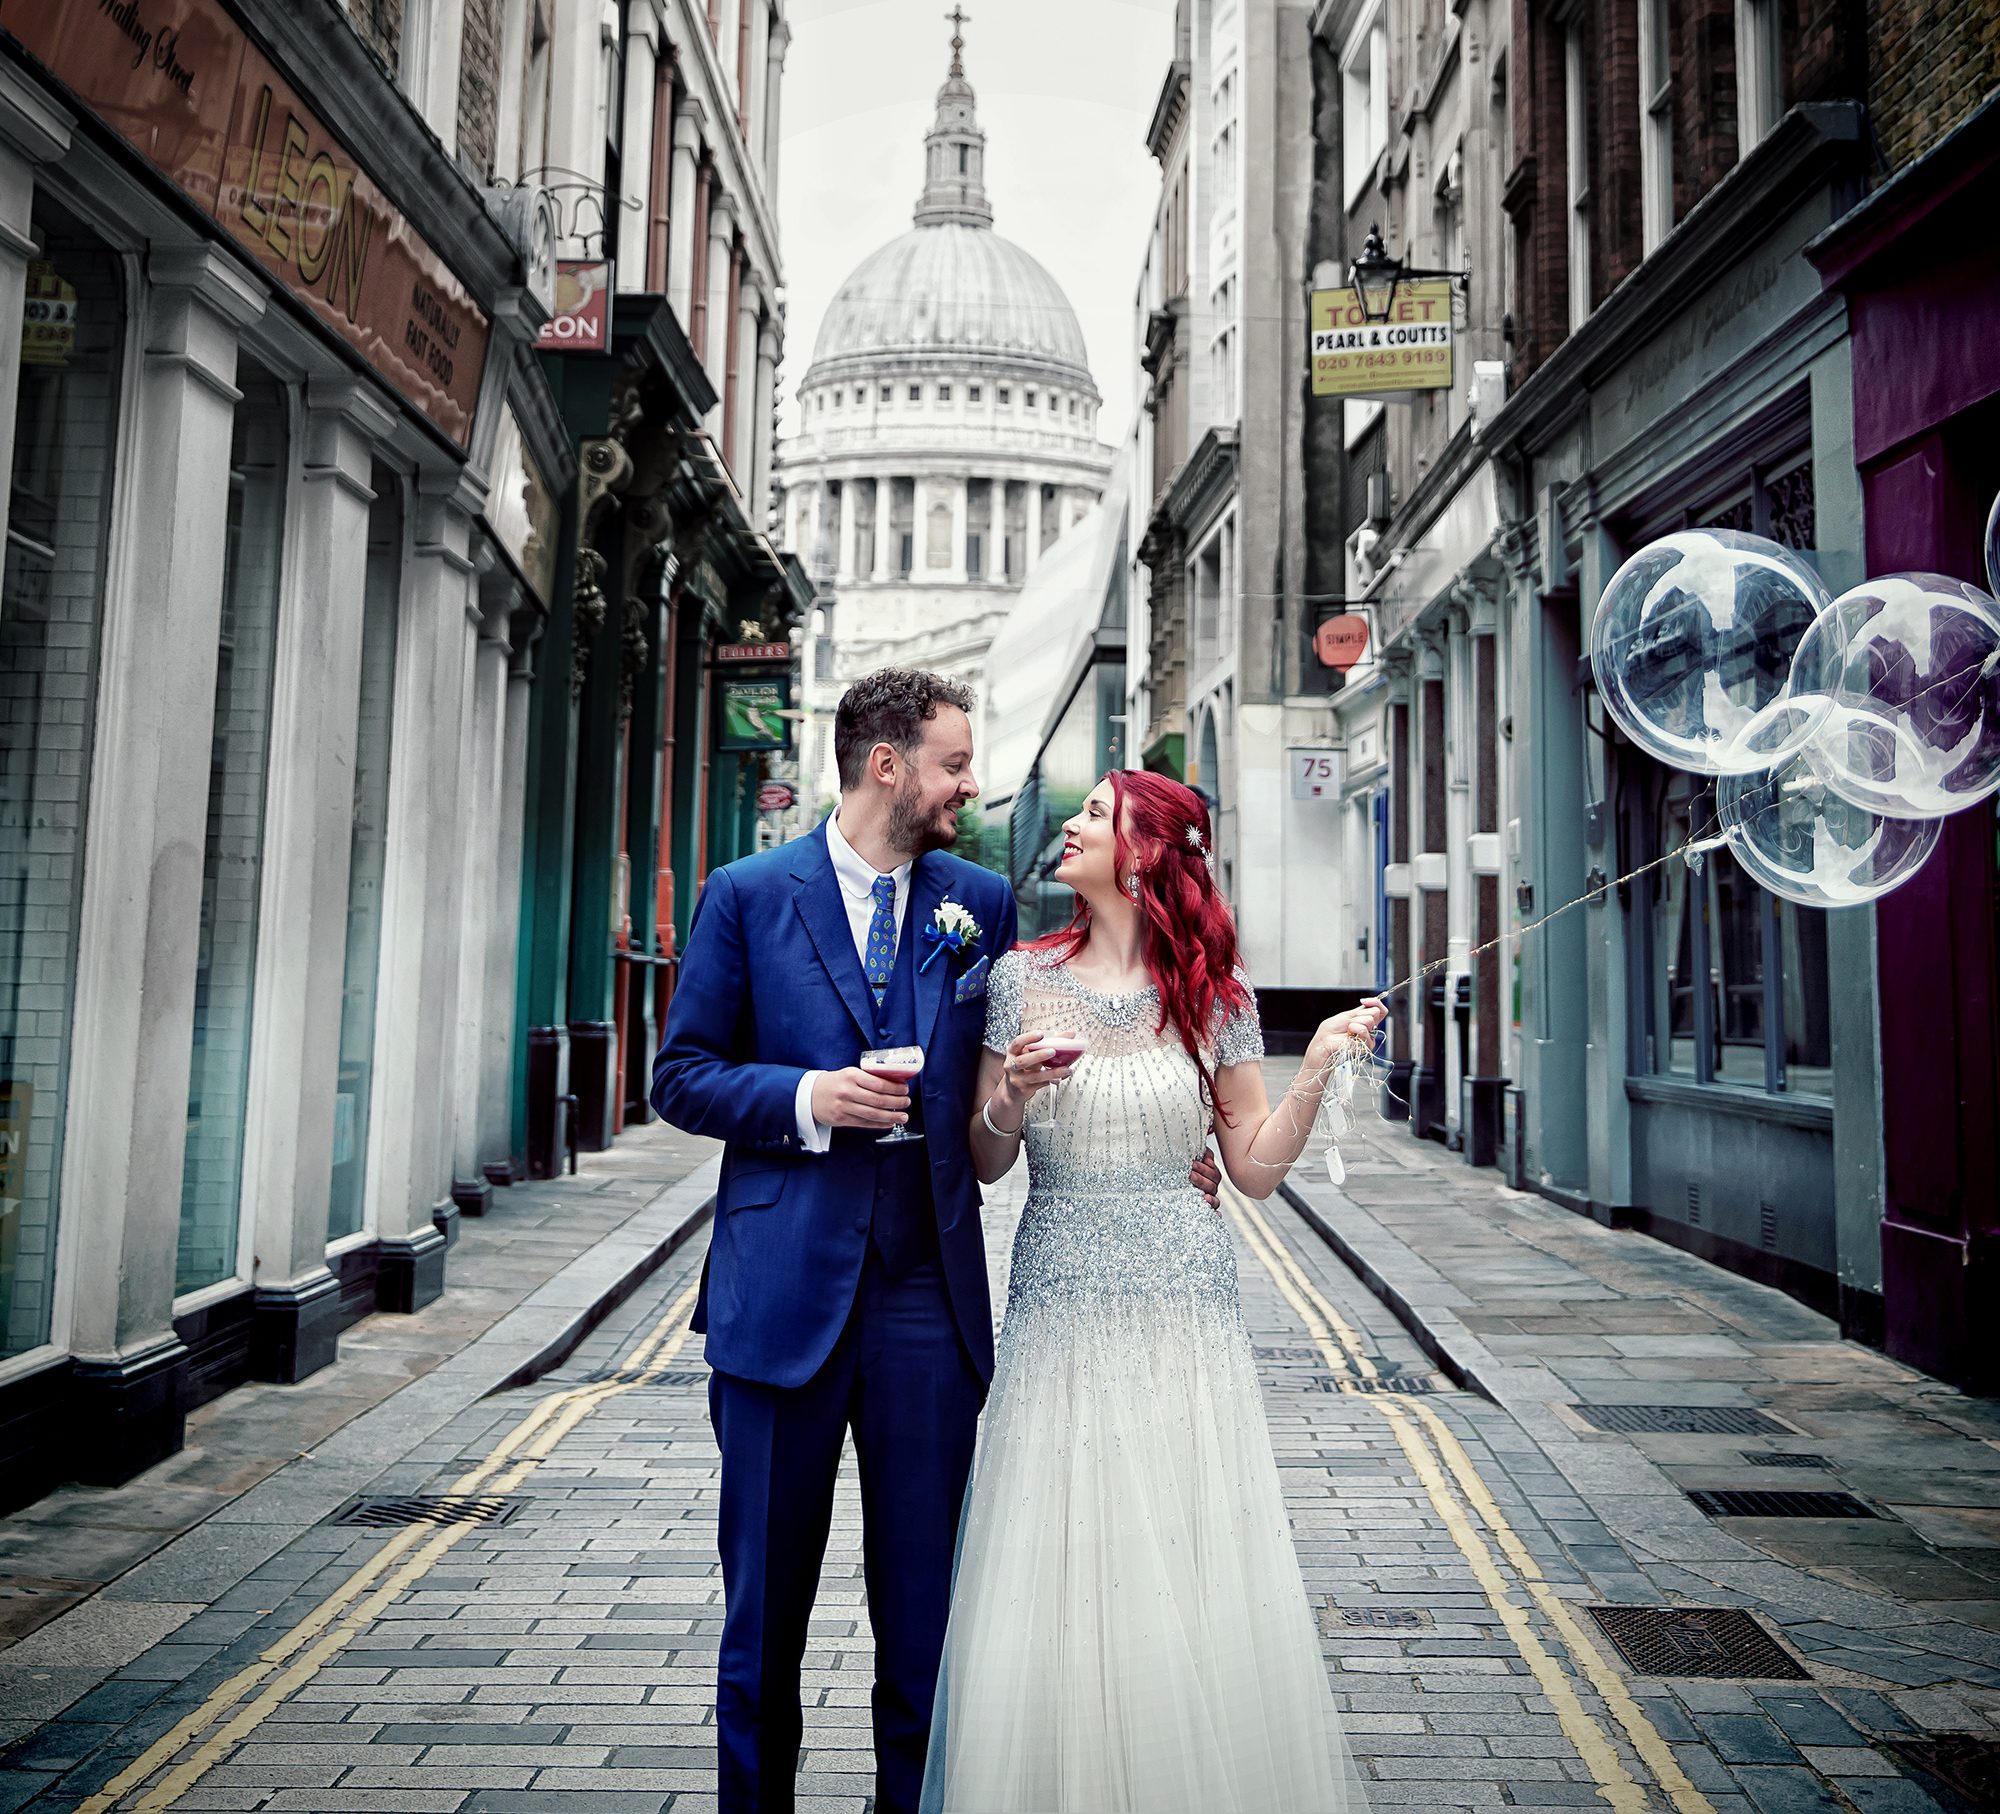 Islington wedding couple with balloons by St Pauls Cathedral image